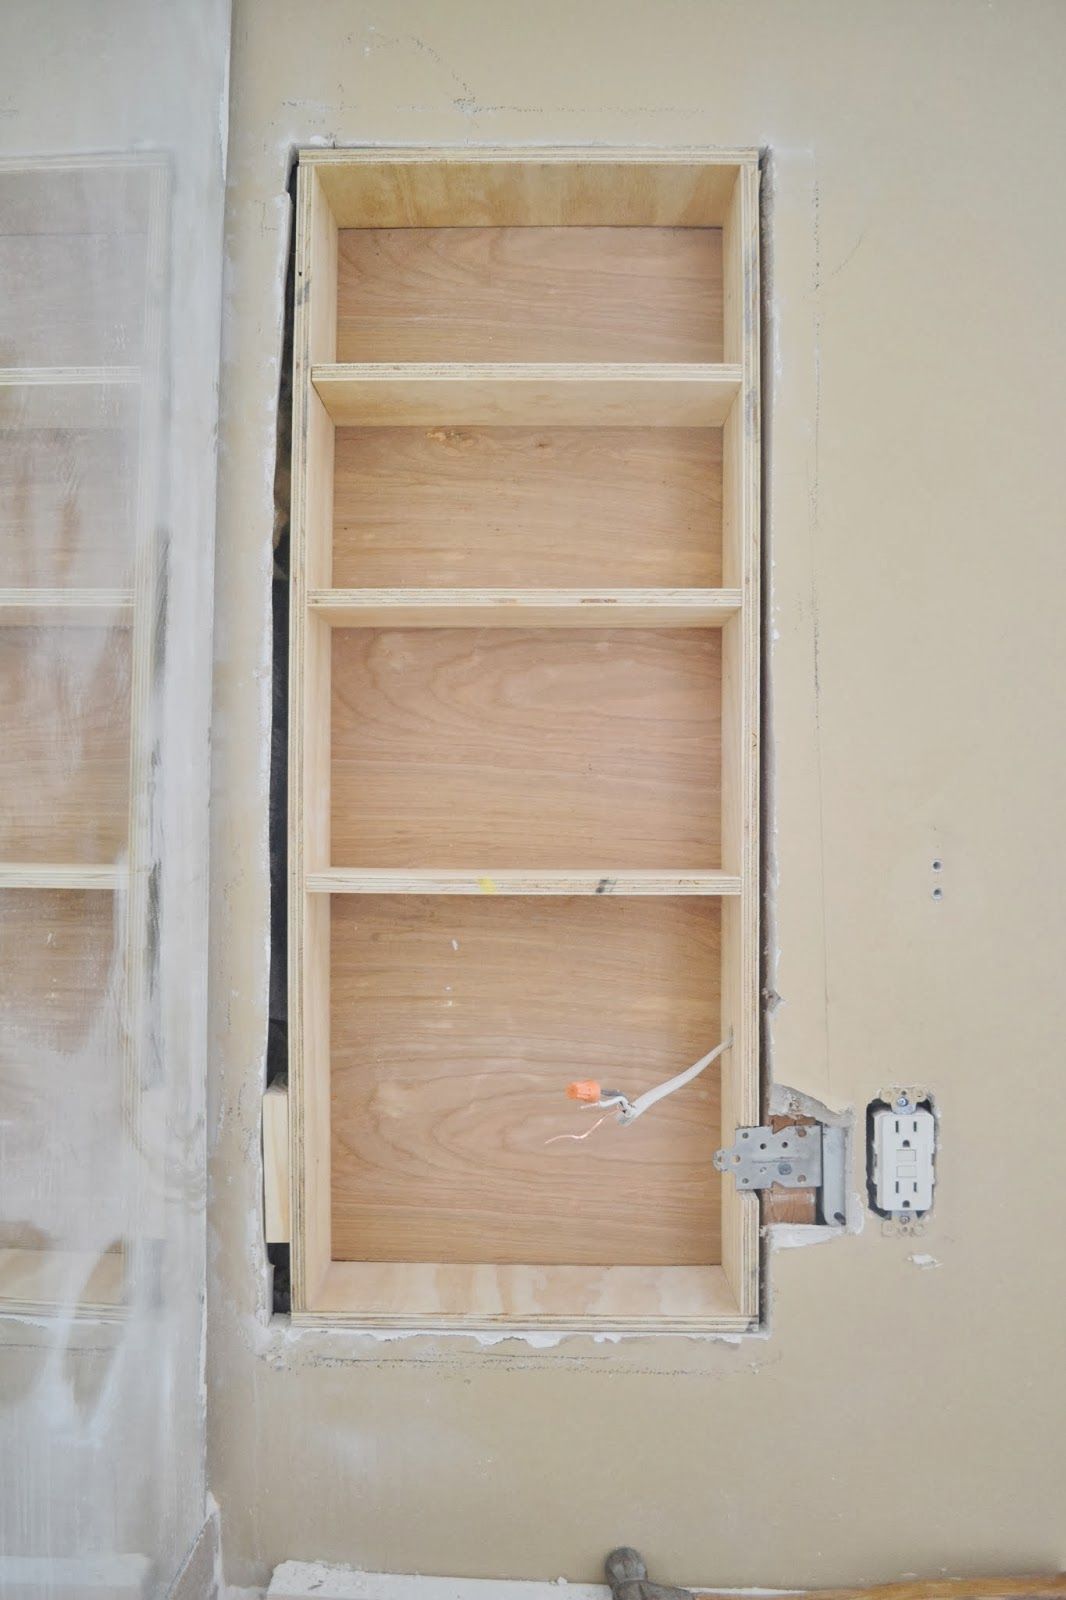 Between the Studs Storage – A TutorialUsing Stair Tread Nosing as Finishing Trim on Built-in ShelvesBetween The Studs Storage –